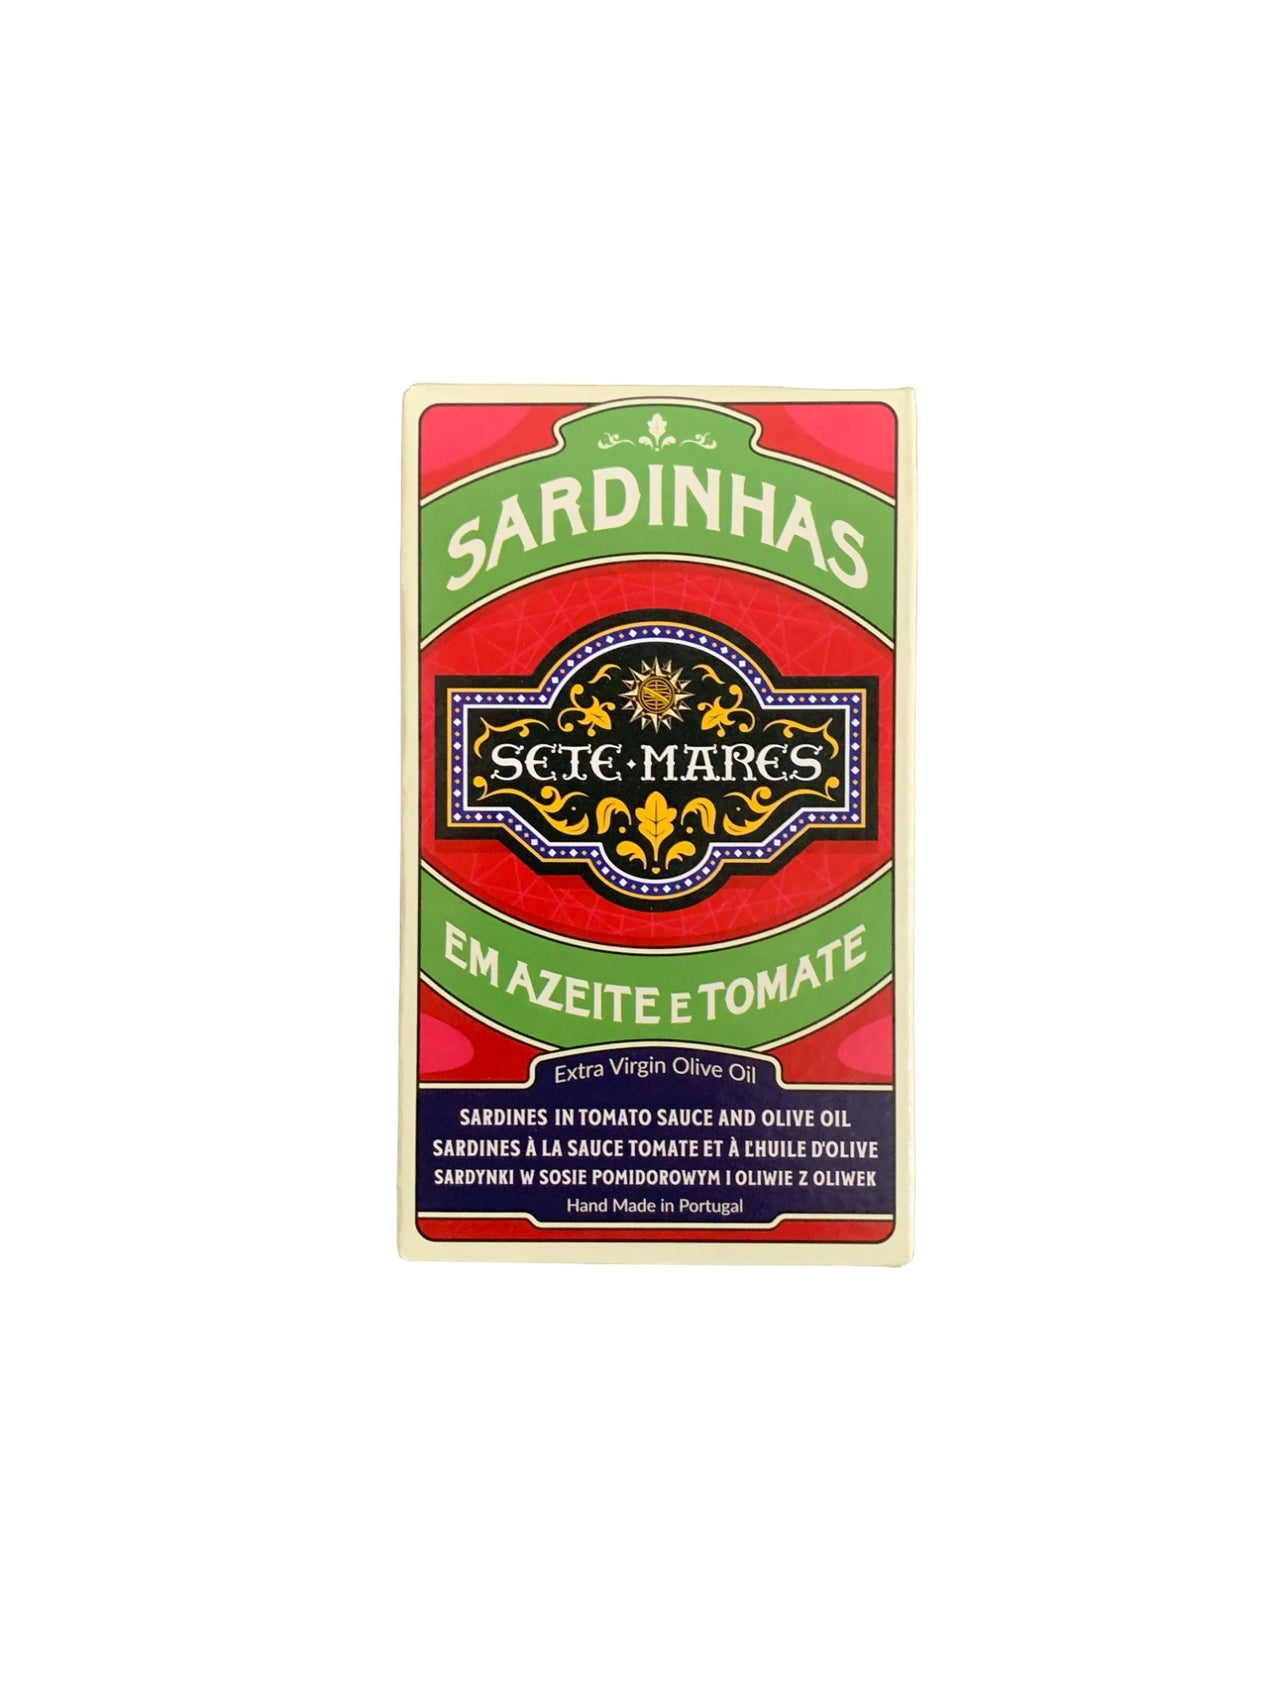 Sete Mares Sardines in Tomato Sauce and Olive Oil - 6 Pack - TinCanFish